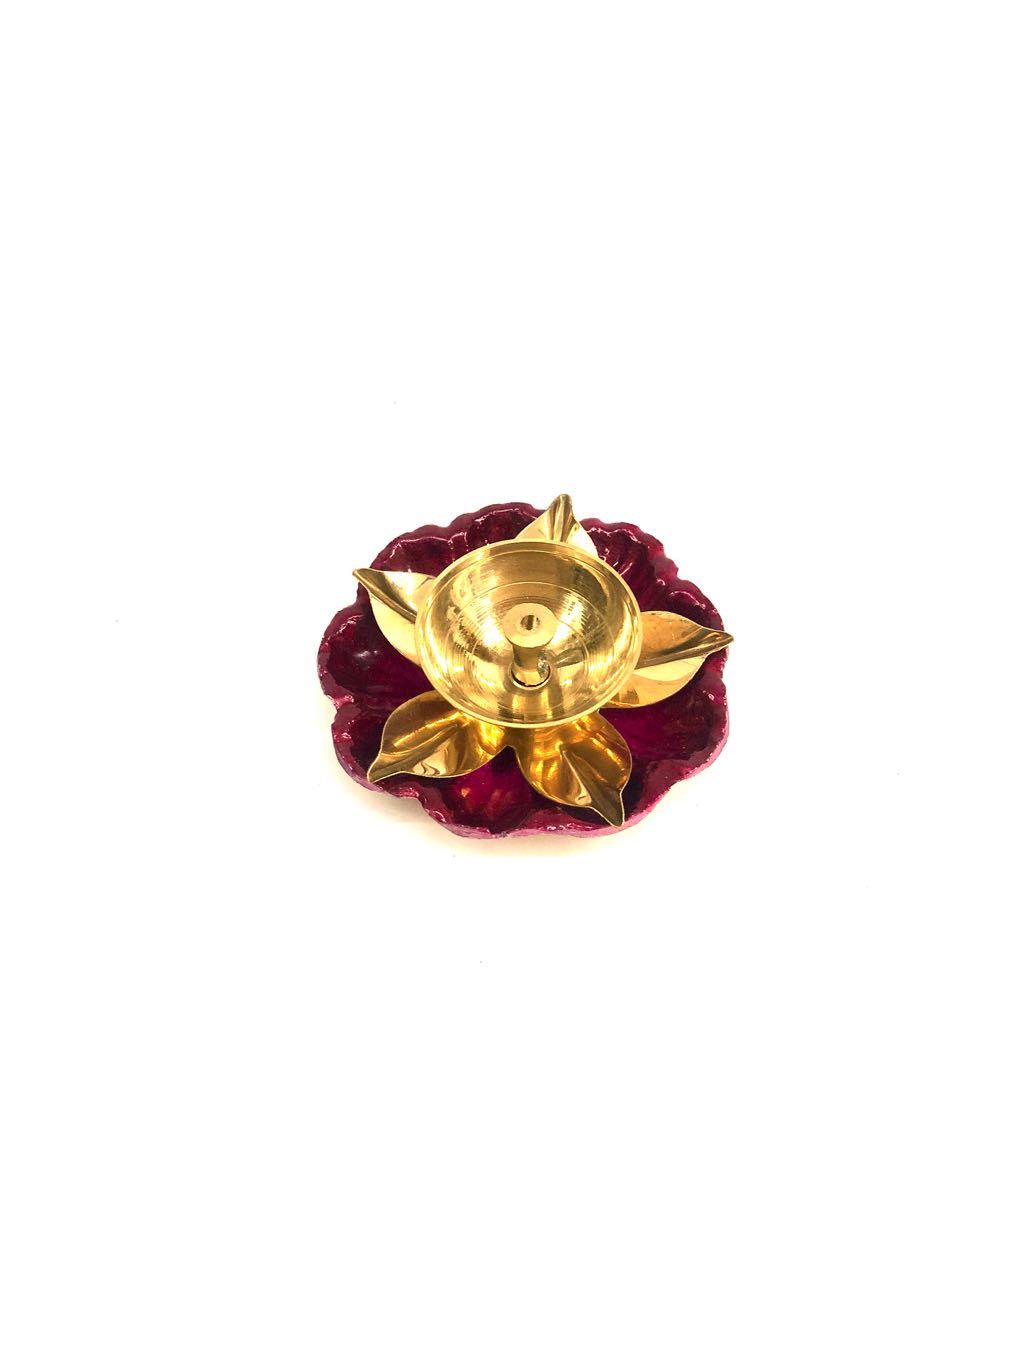 Colorful Lotus Brass Diya Attractive Design For Temple Décor By Tamrapatra